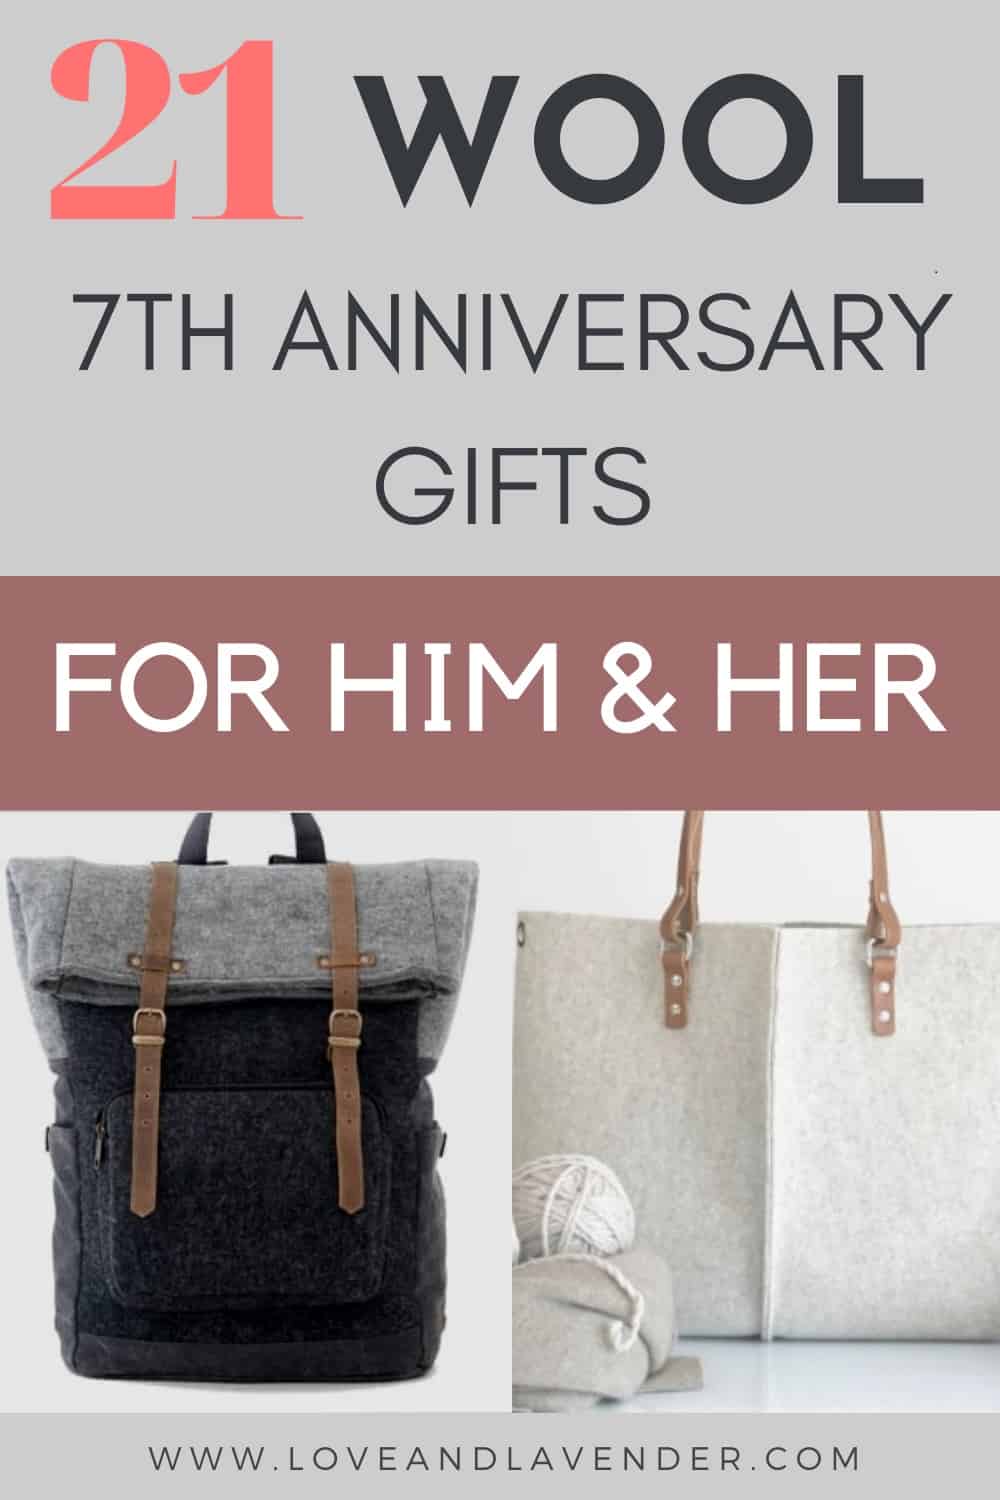 26 Wool Gifts to Warm Your 7th Anniversary